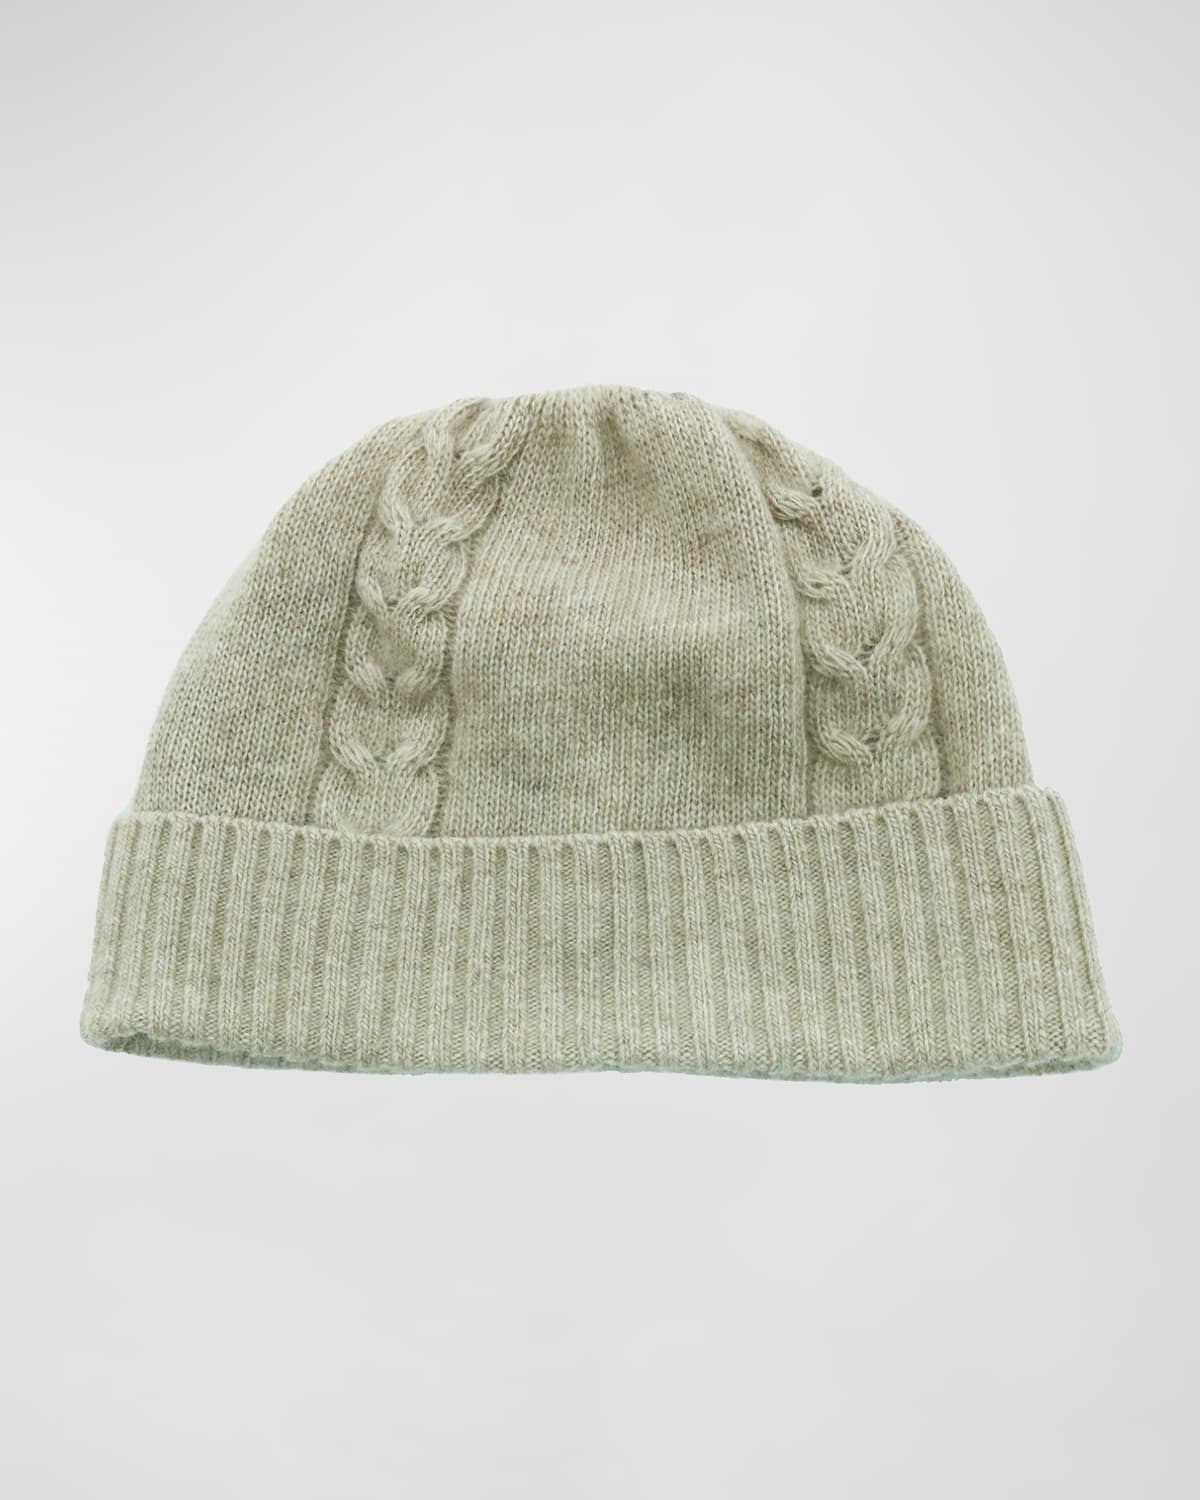 Portolano Men's Cable-knit Beanie Hat In Oatmeal